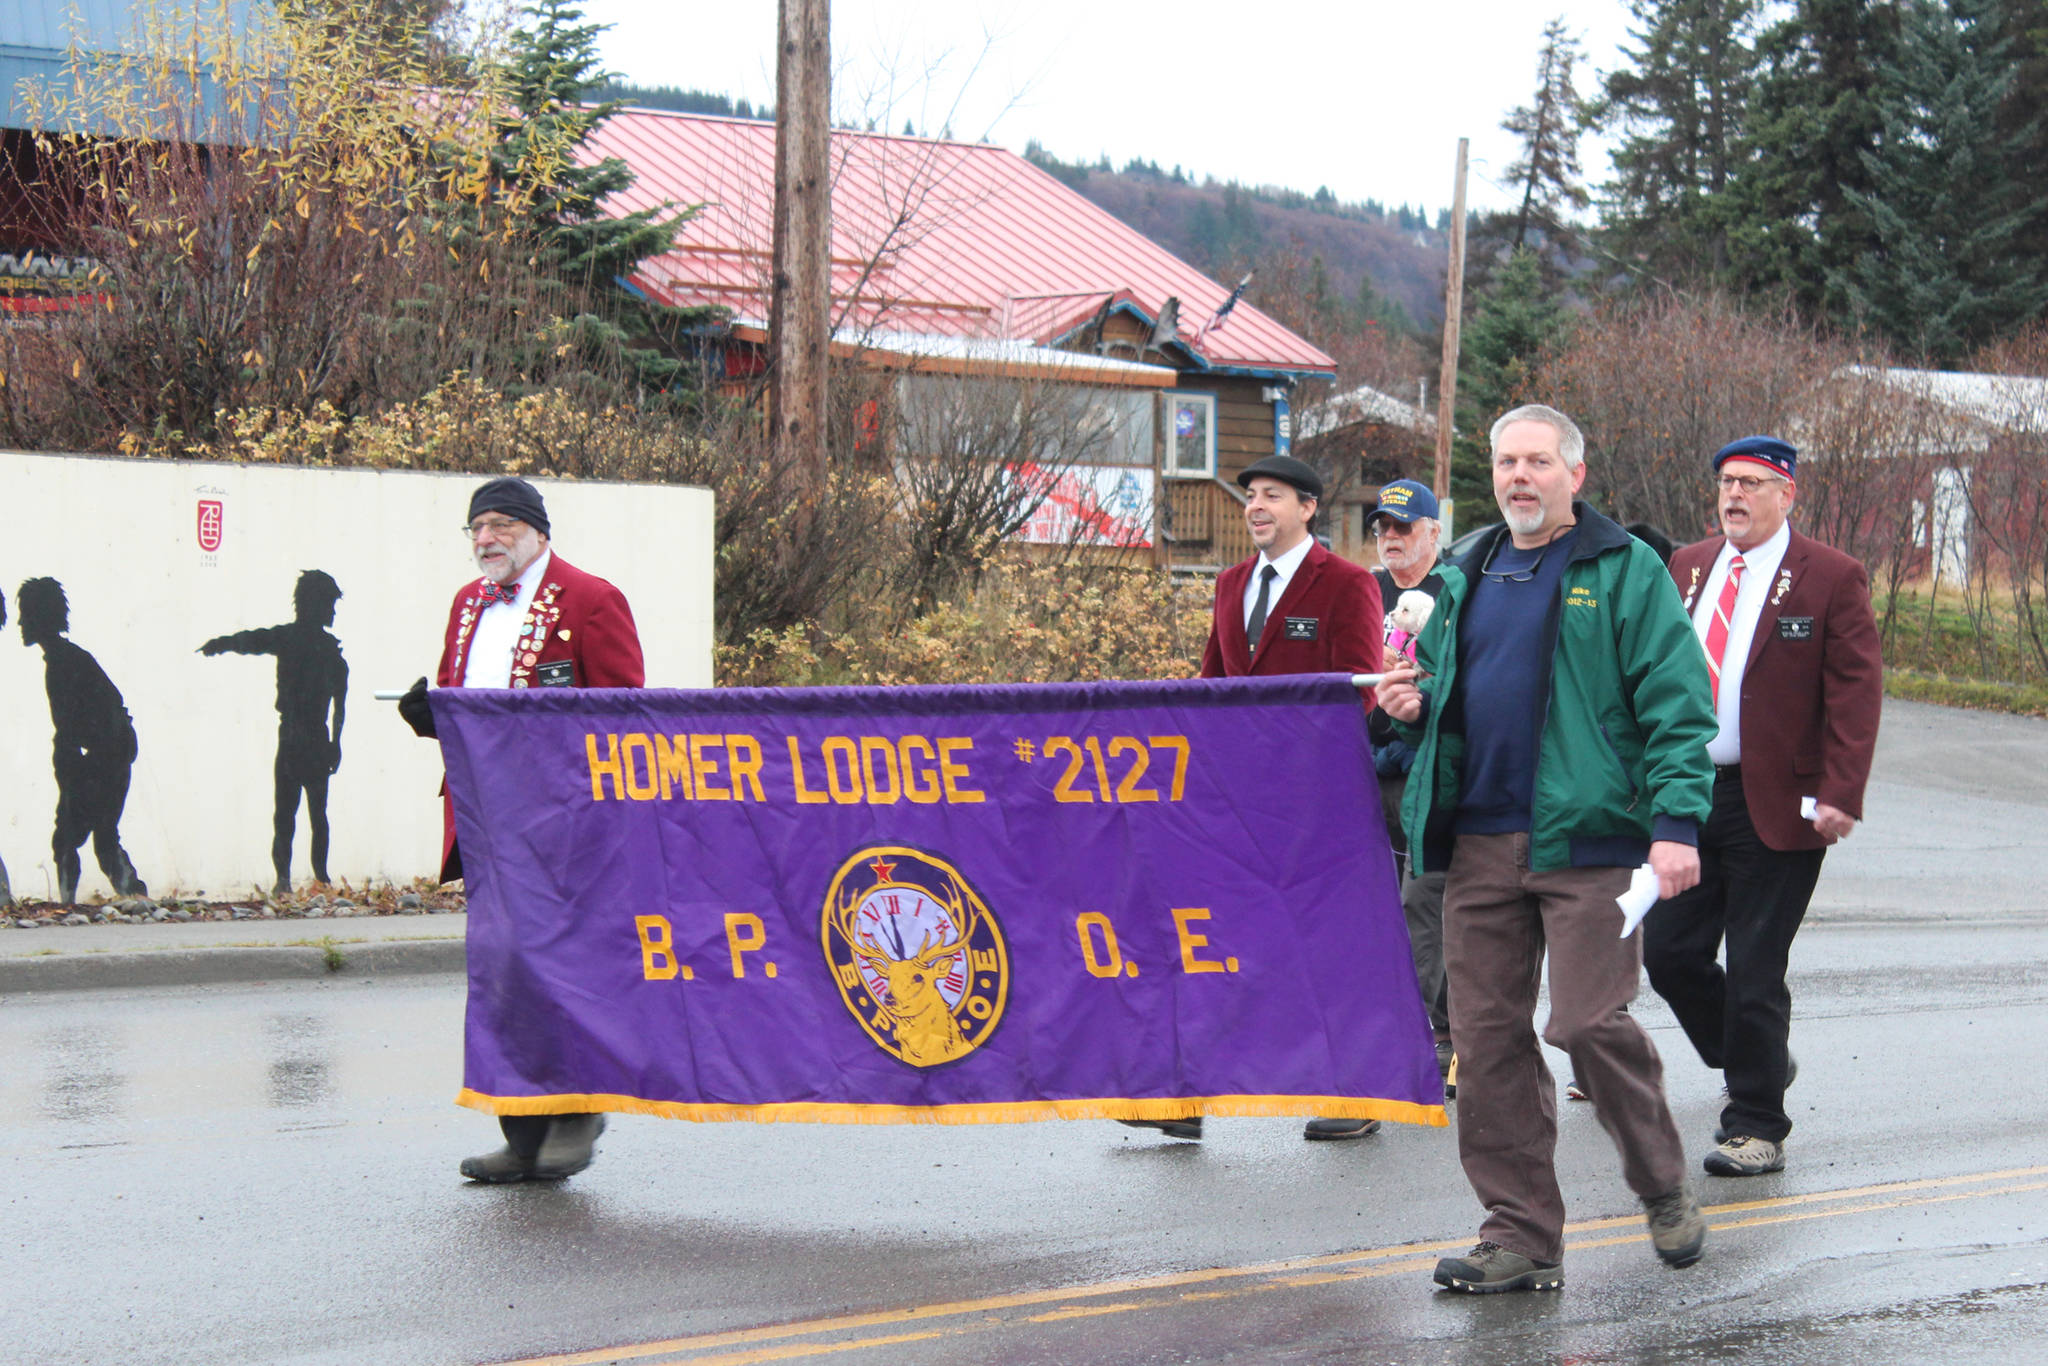 Members of the Homer Elks Club march in a Veterans Day parade Sunday, Nov. 11, 2018 in Homer, Alaska. (Photo by Megan Pacer/Homer News)